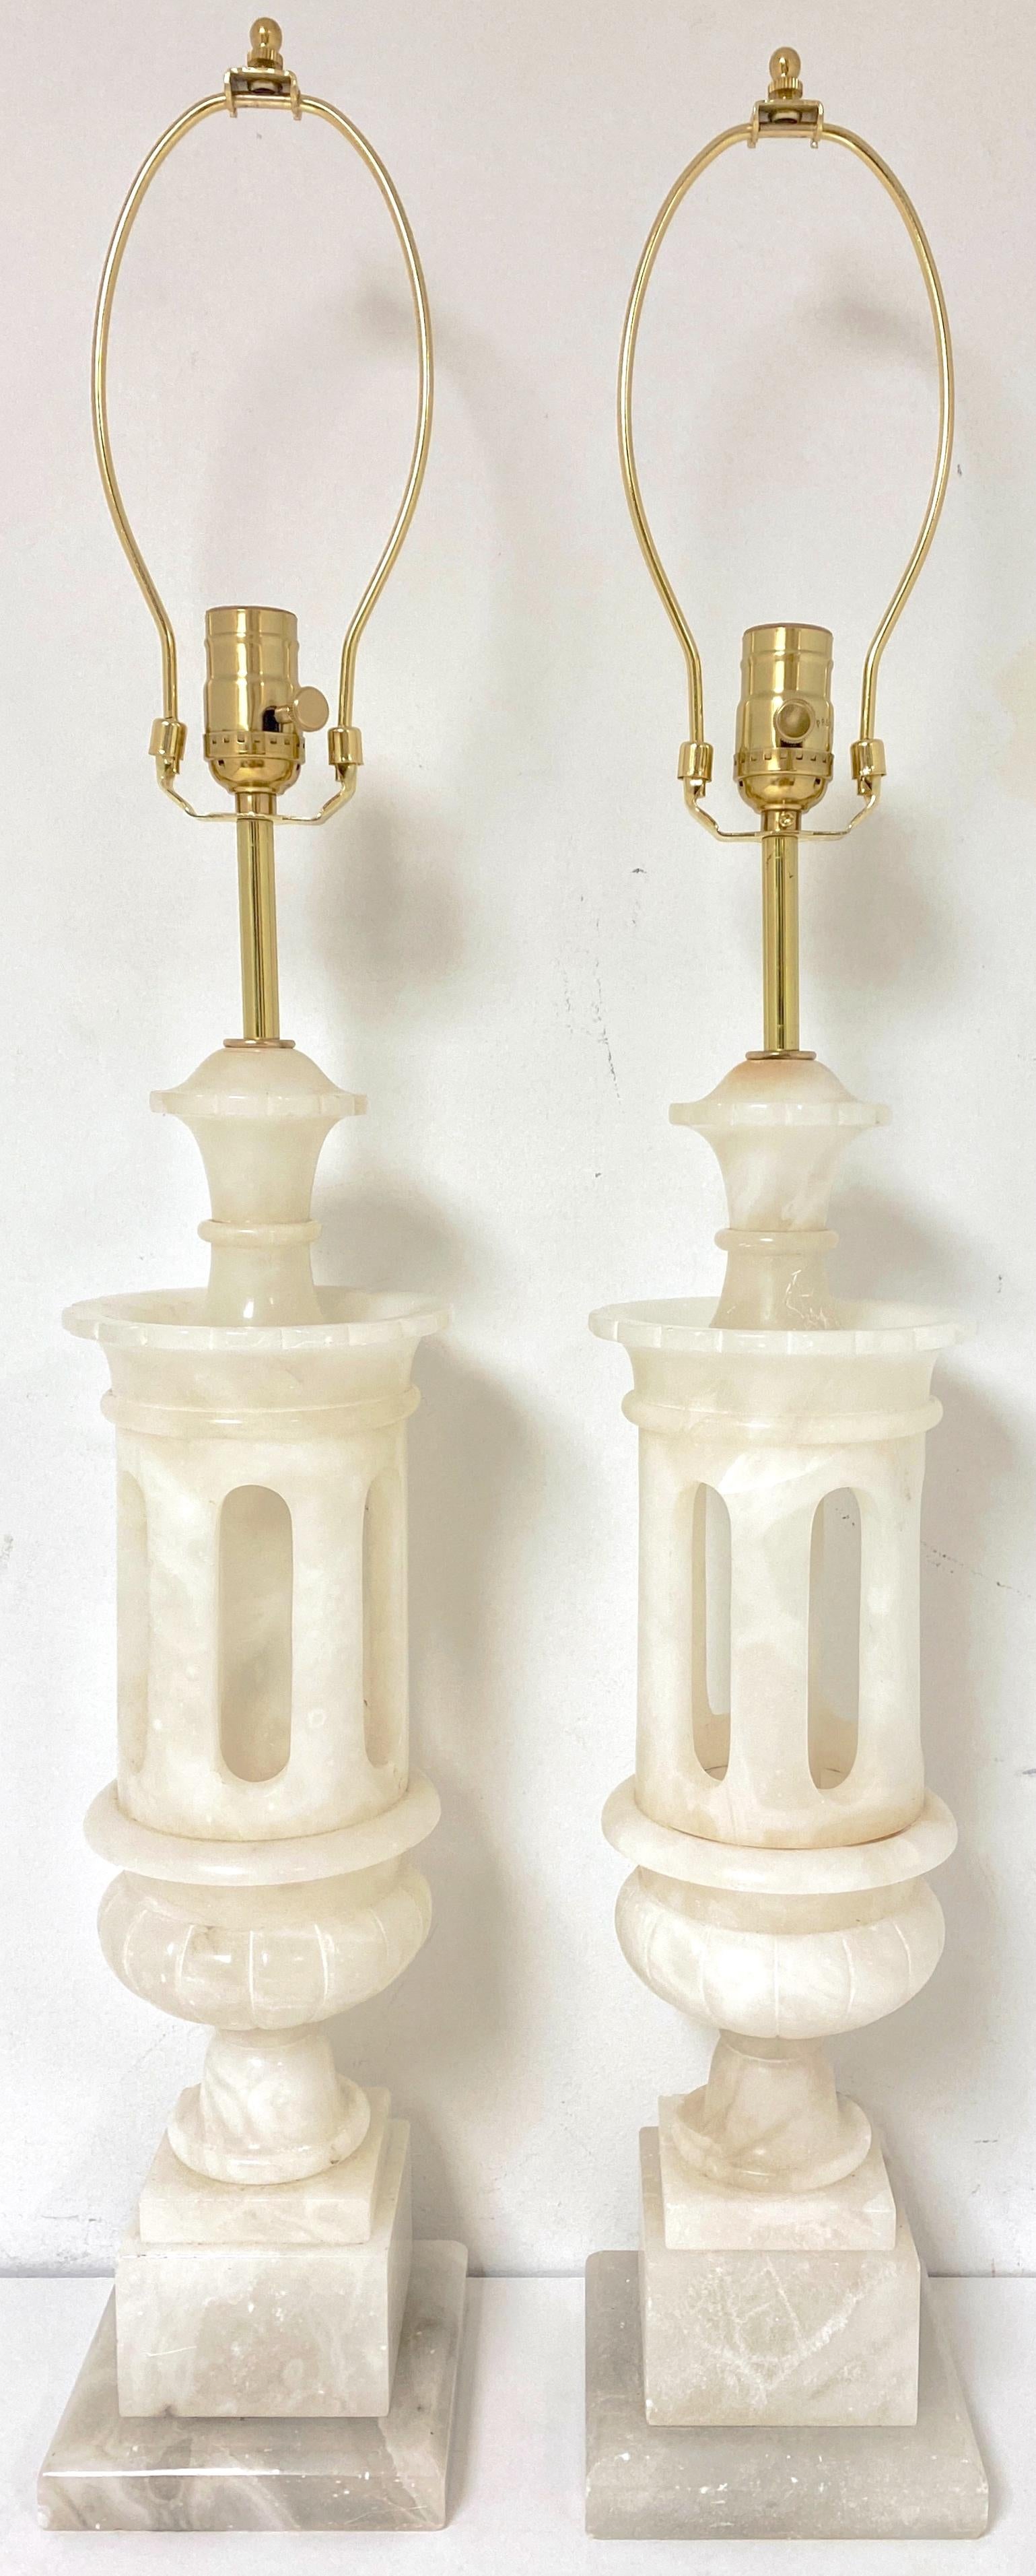 Pair Italian Carved Marble Moorish Architectural Lamps Attrib. Marbro Lamp Co. 
Italy, Circa 1960s
Attributed to the Marbro Lamp Company

A stunning pair of Italian Carved Marble Moorish Architectural Lamps, attributed to the renowned Marbro Lamp